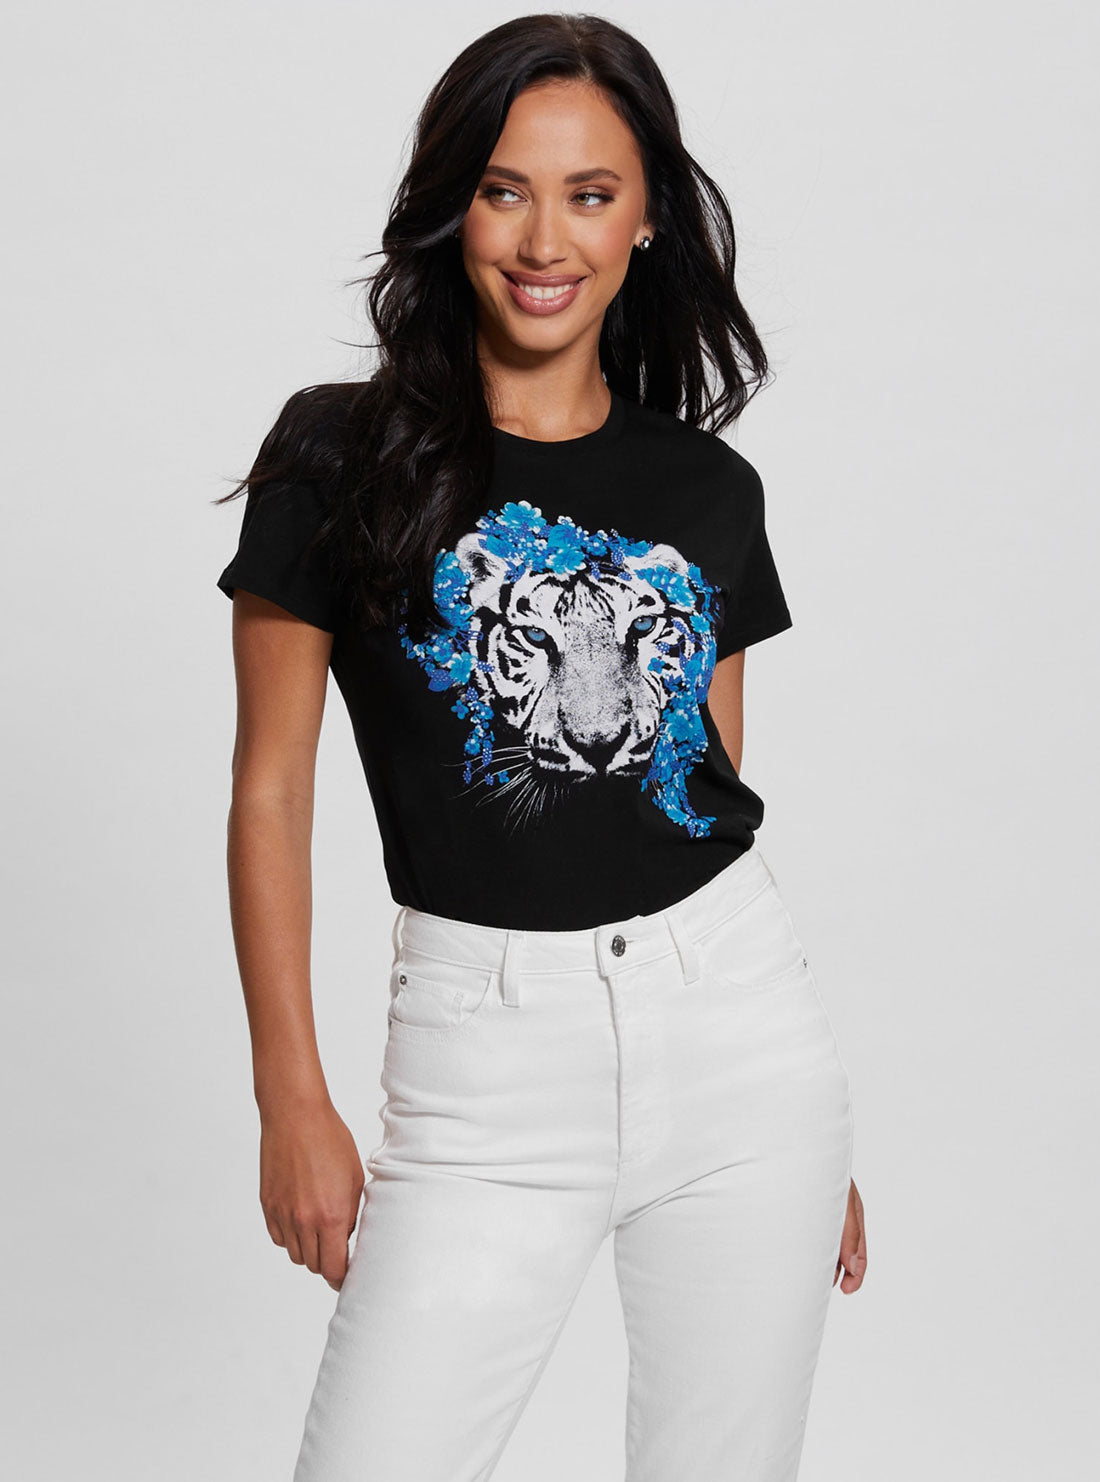 Black Floral Tiger Easy T-Shirt | GUESS Women's Apparel | front view